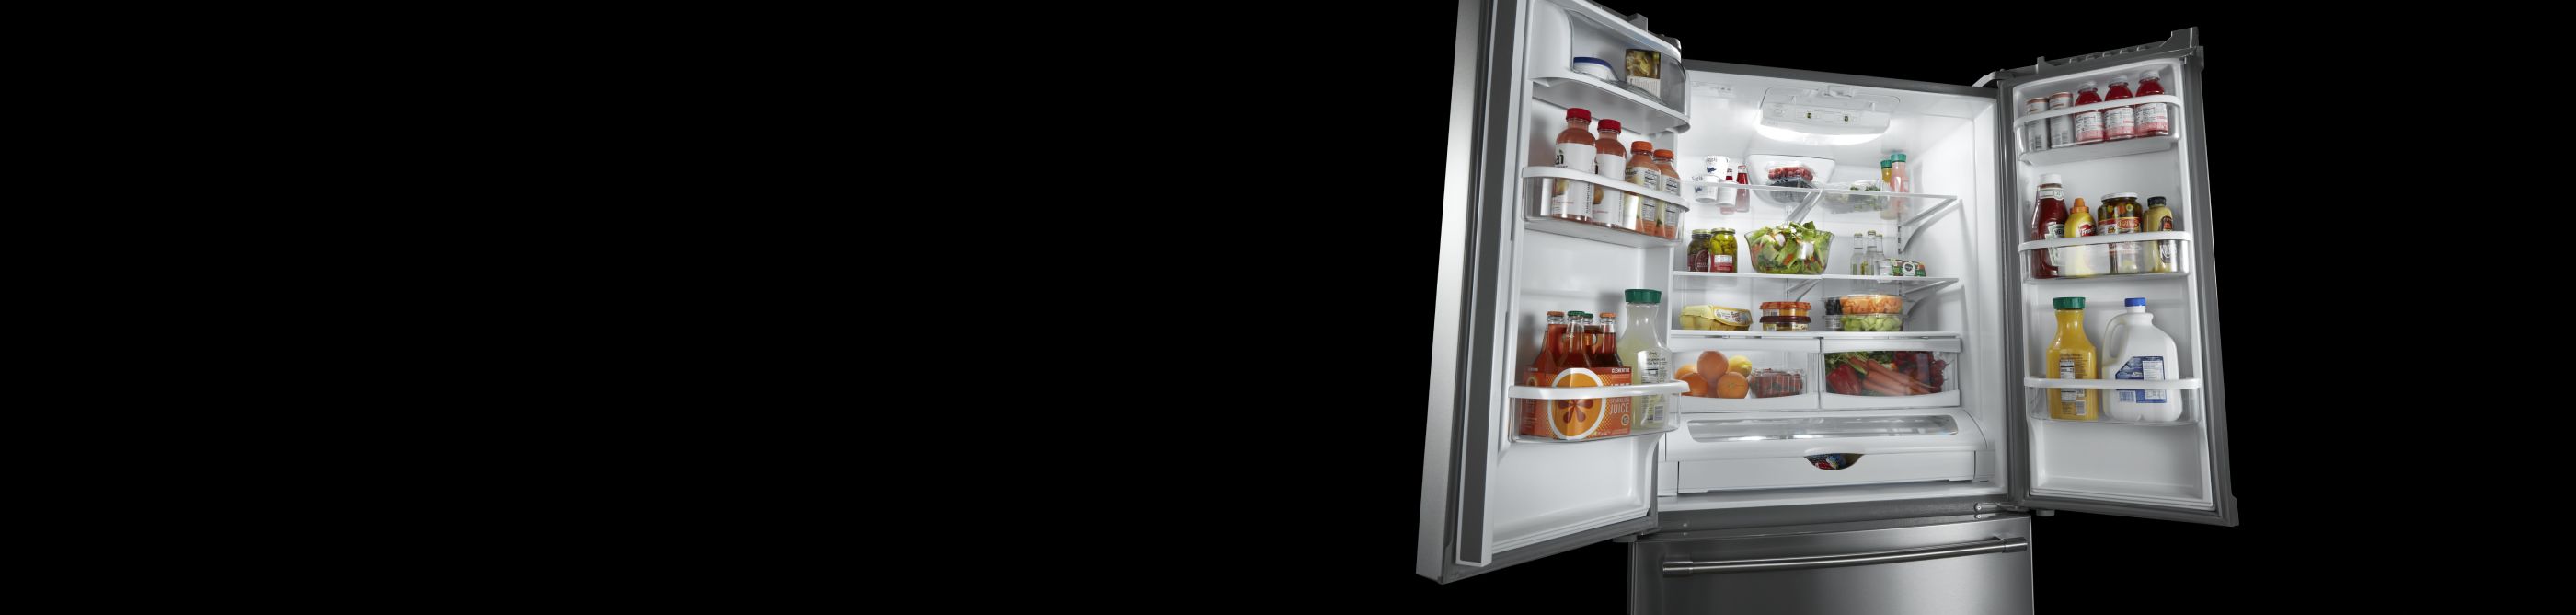 An open French door refrigerator with various food items inside